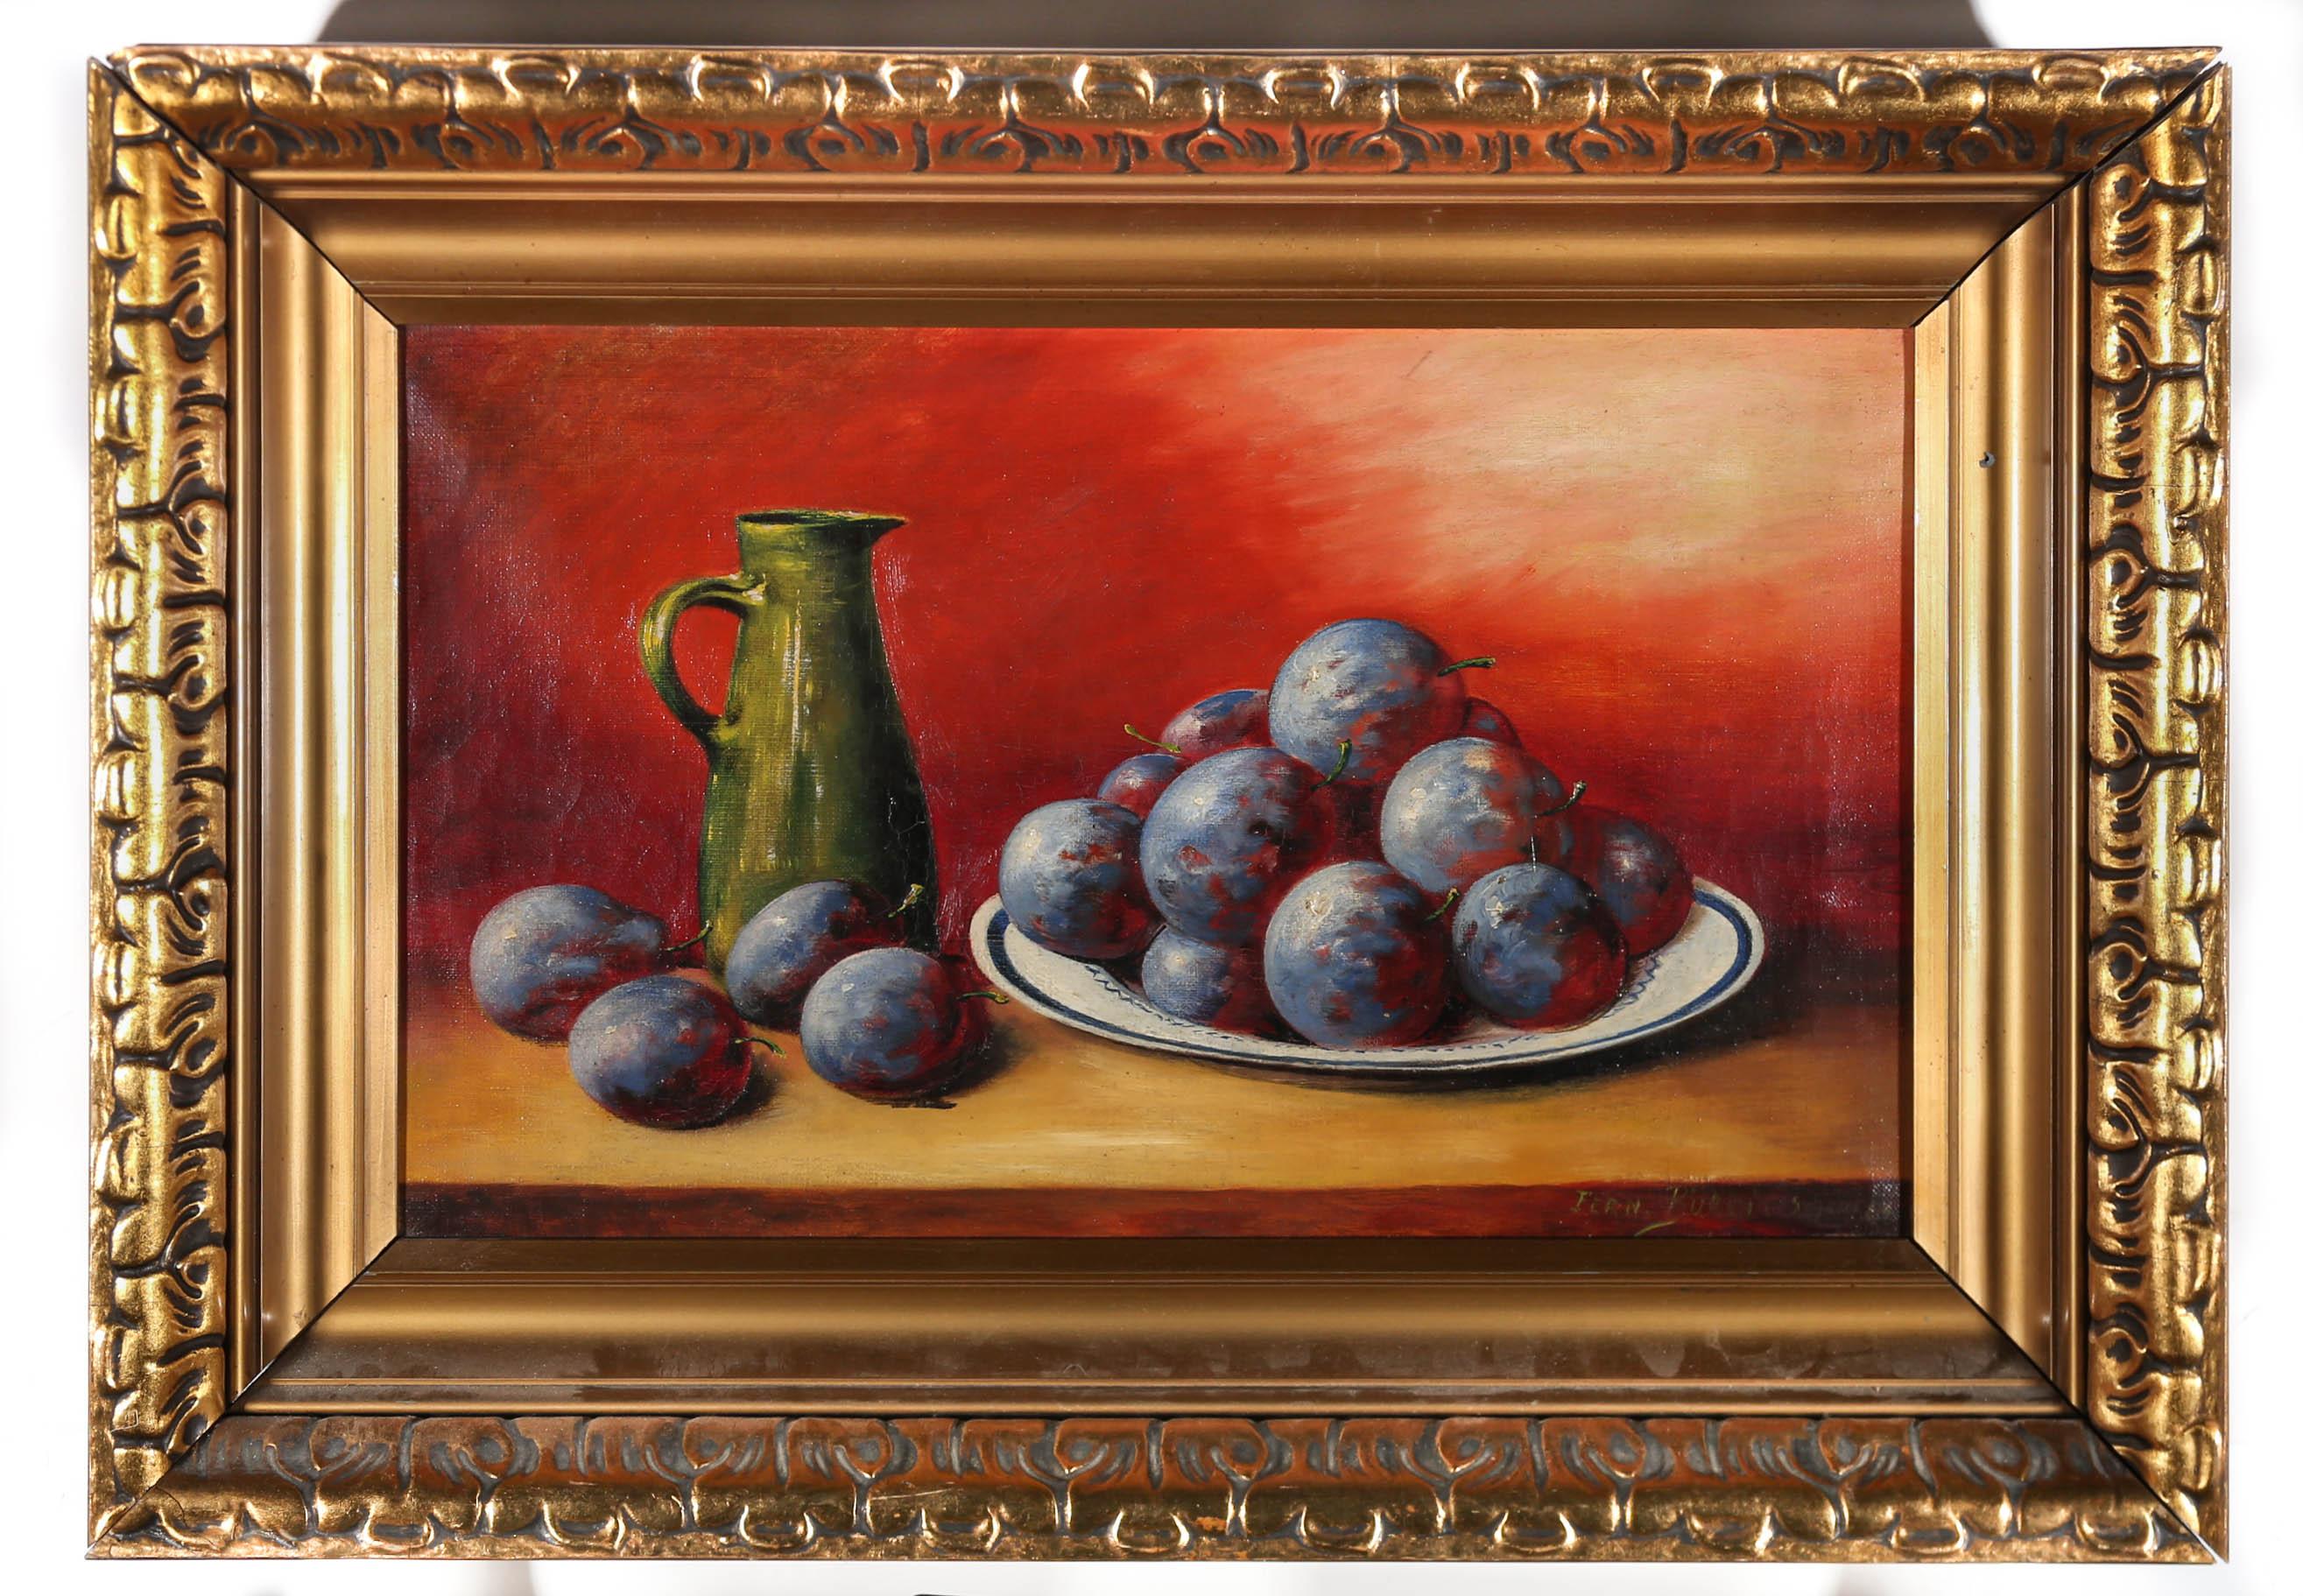 A vibrant sunset backdrop sets the tone for this quirky still life of sumptuous plums, mounded beside a gleaming green water jug. Indistinctly signed to the lower right. The oil comes presented in an extravagant deep sided frame with oversized